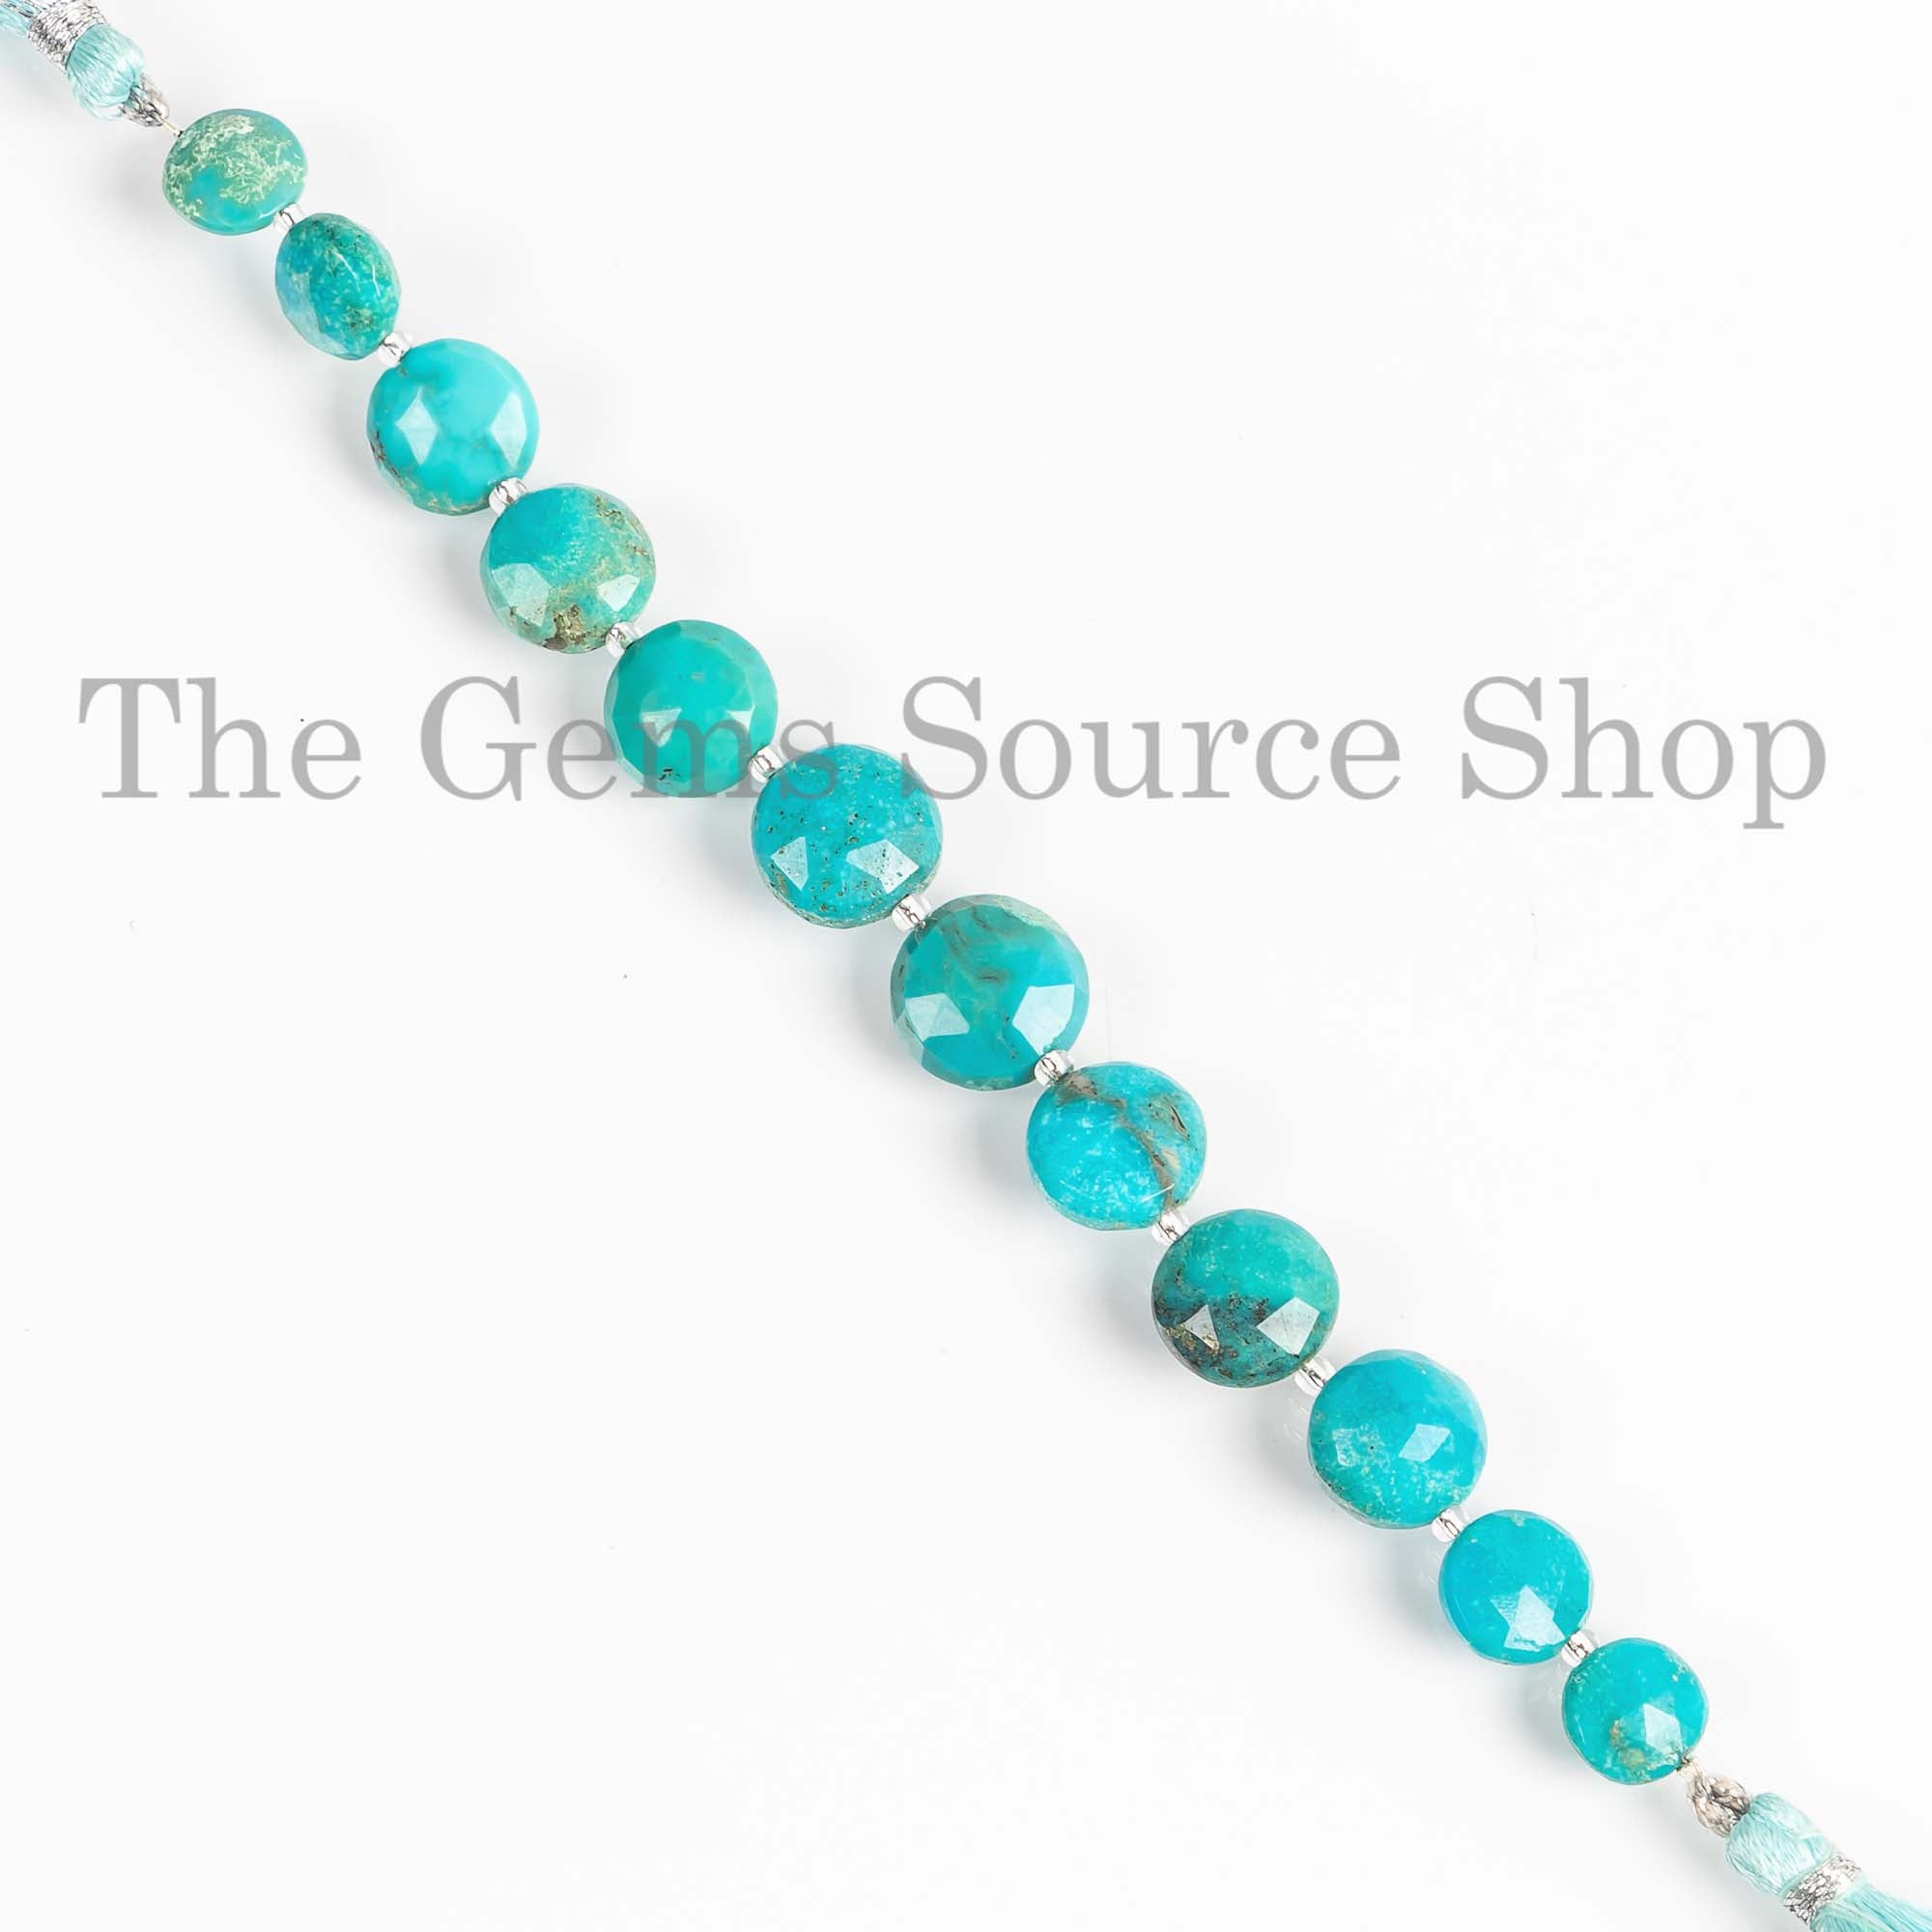 8.5-12mm Arizona Turquoise Coin Briolette, Turquoise Round Coin Beads, Turquoise Faceted Beads, Coin Beads, Beads For Jewelry